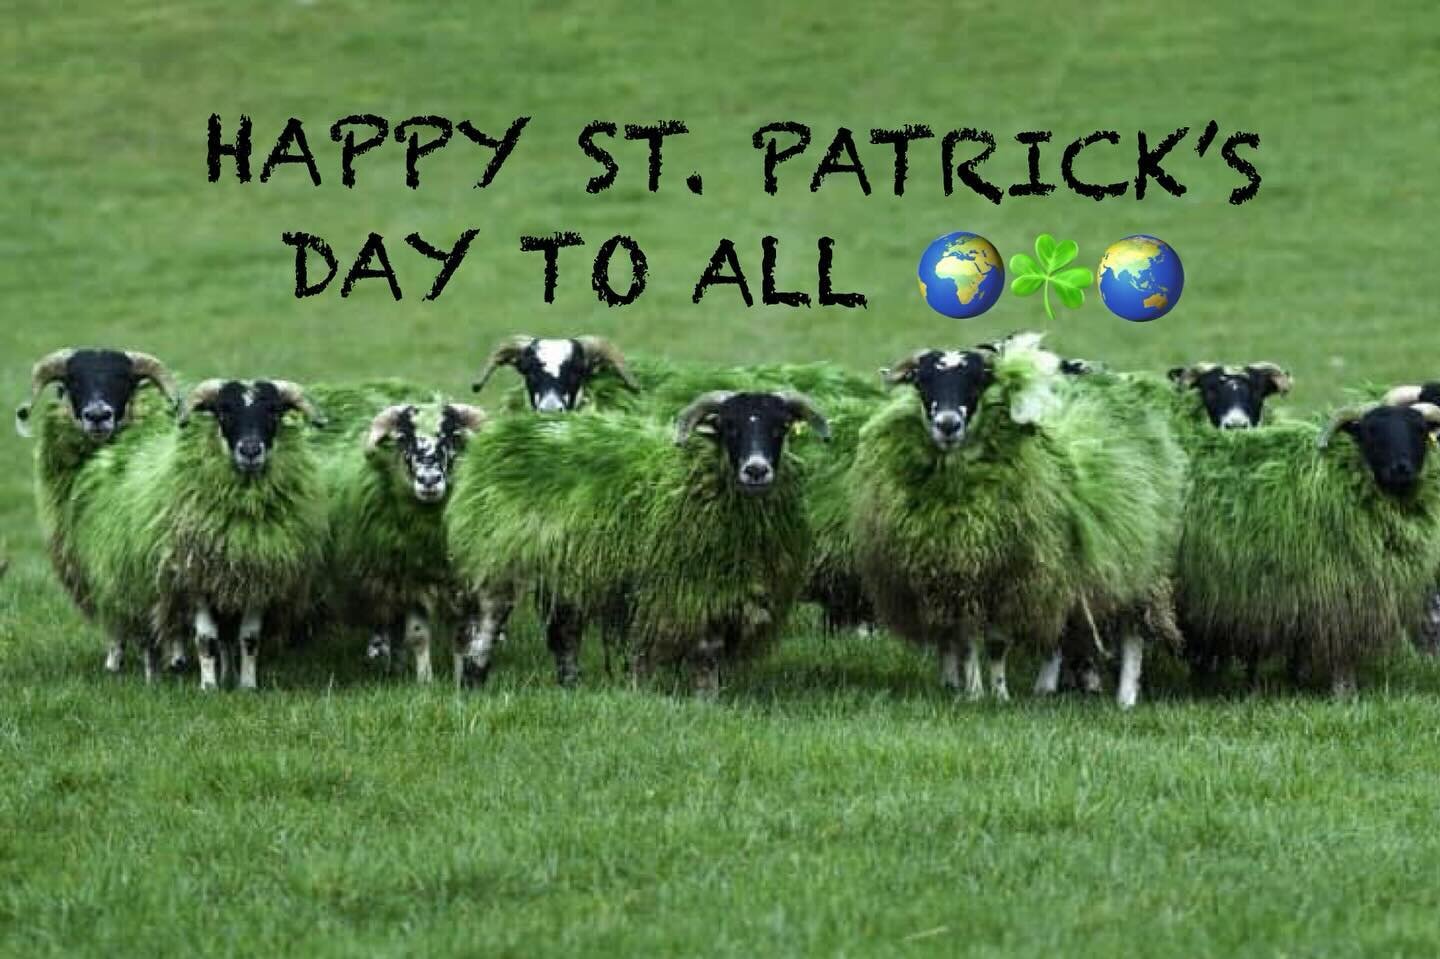 ☘️💙☘️💙☘️ from all of us here @seagency1 we wish you all a dose of great craic and mighty shenanigans this weekend ☘️💙☘️

#stpatricksday #stpatricksfestival #paddysday